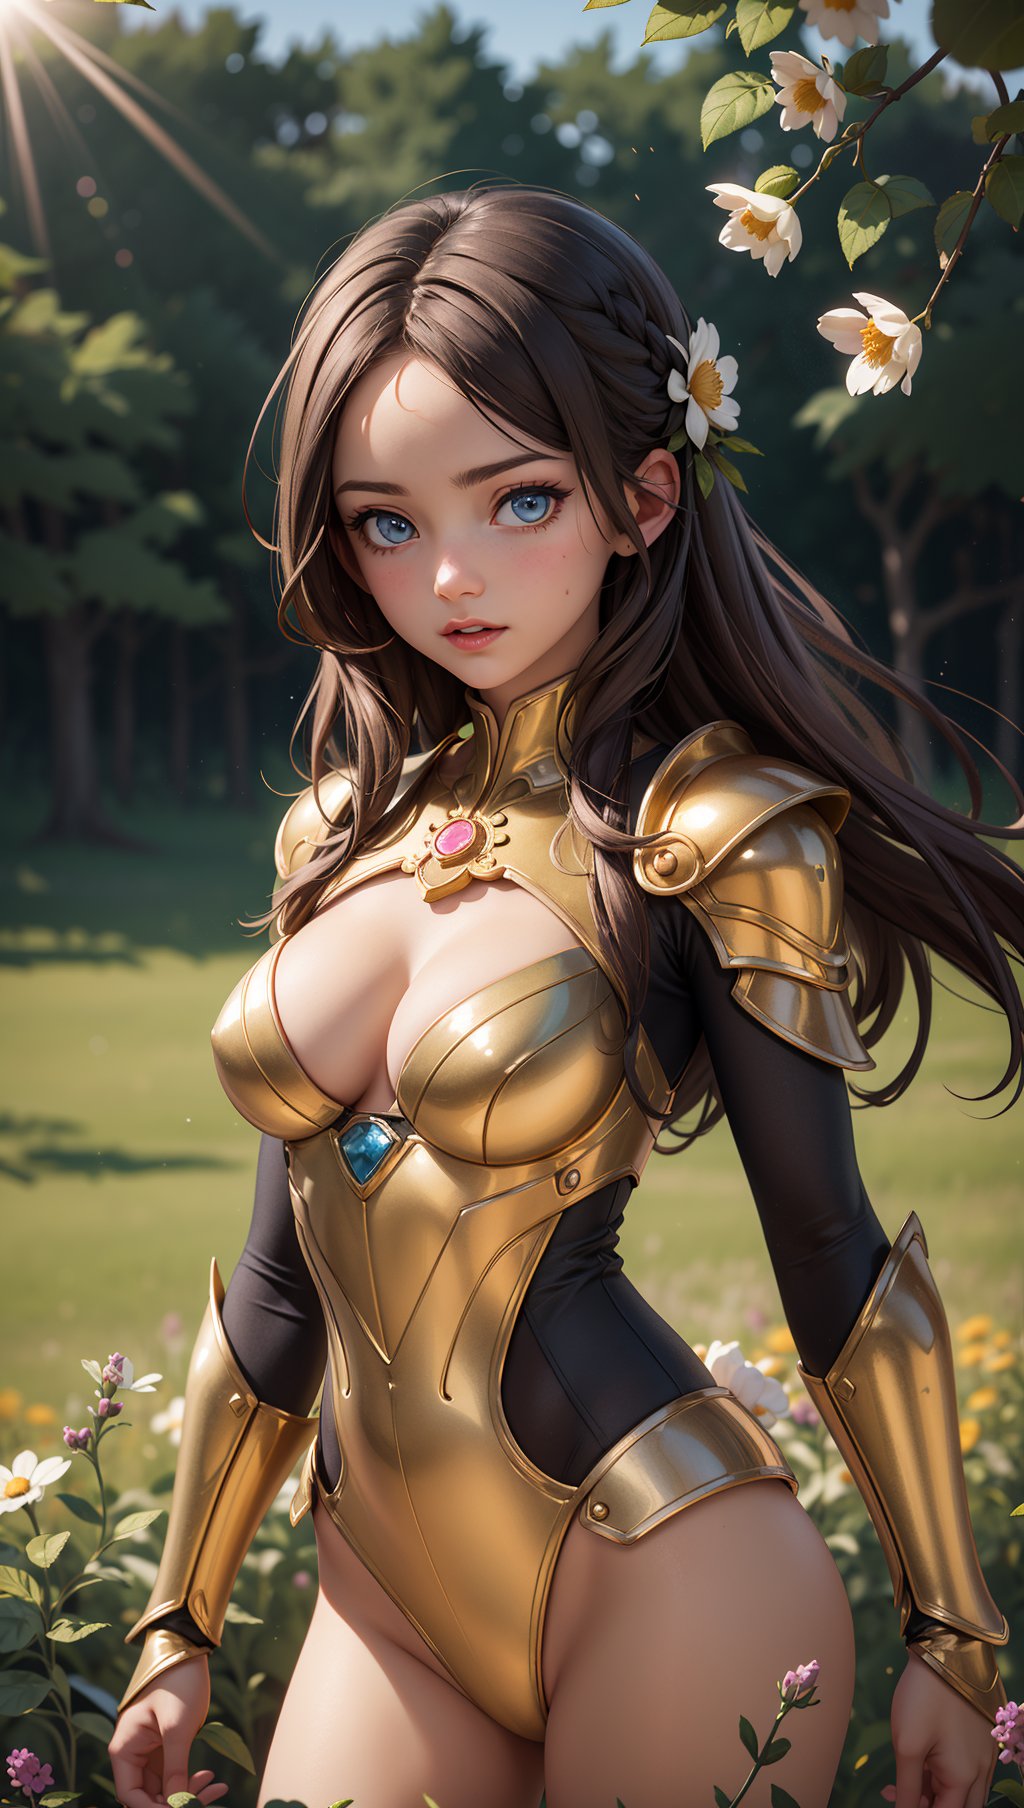 (masterpiece),(best quality),(extremely intricate),(sharp focus),(cinematic lighting),(extremely detailed),A young girl in armor,standing in a meadow of wildflowers. She has long brown hair adorned with wildflowers. Her expression is determined,and her eyes are shining with courage. The sun is shining brightly behind her,casting a golden glow over the scene.,flower4rmor,flower bodysuit,Flower,